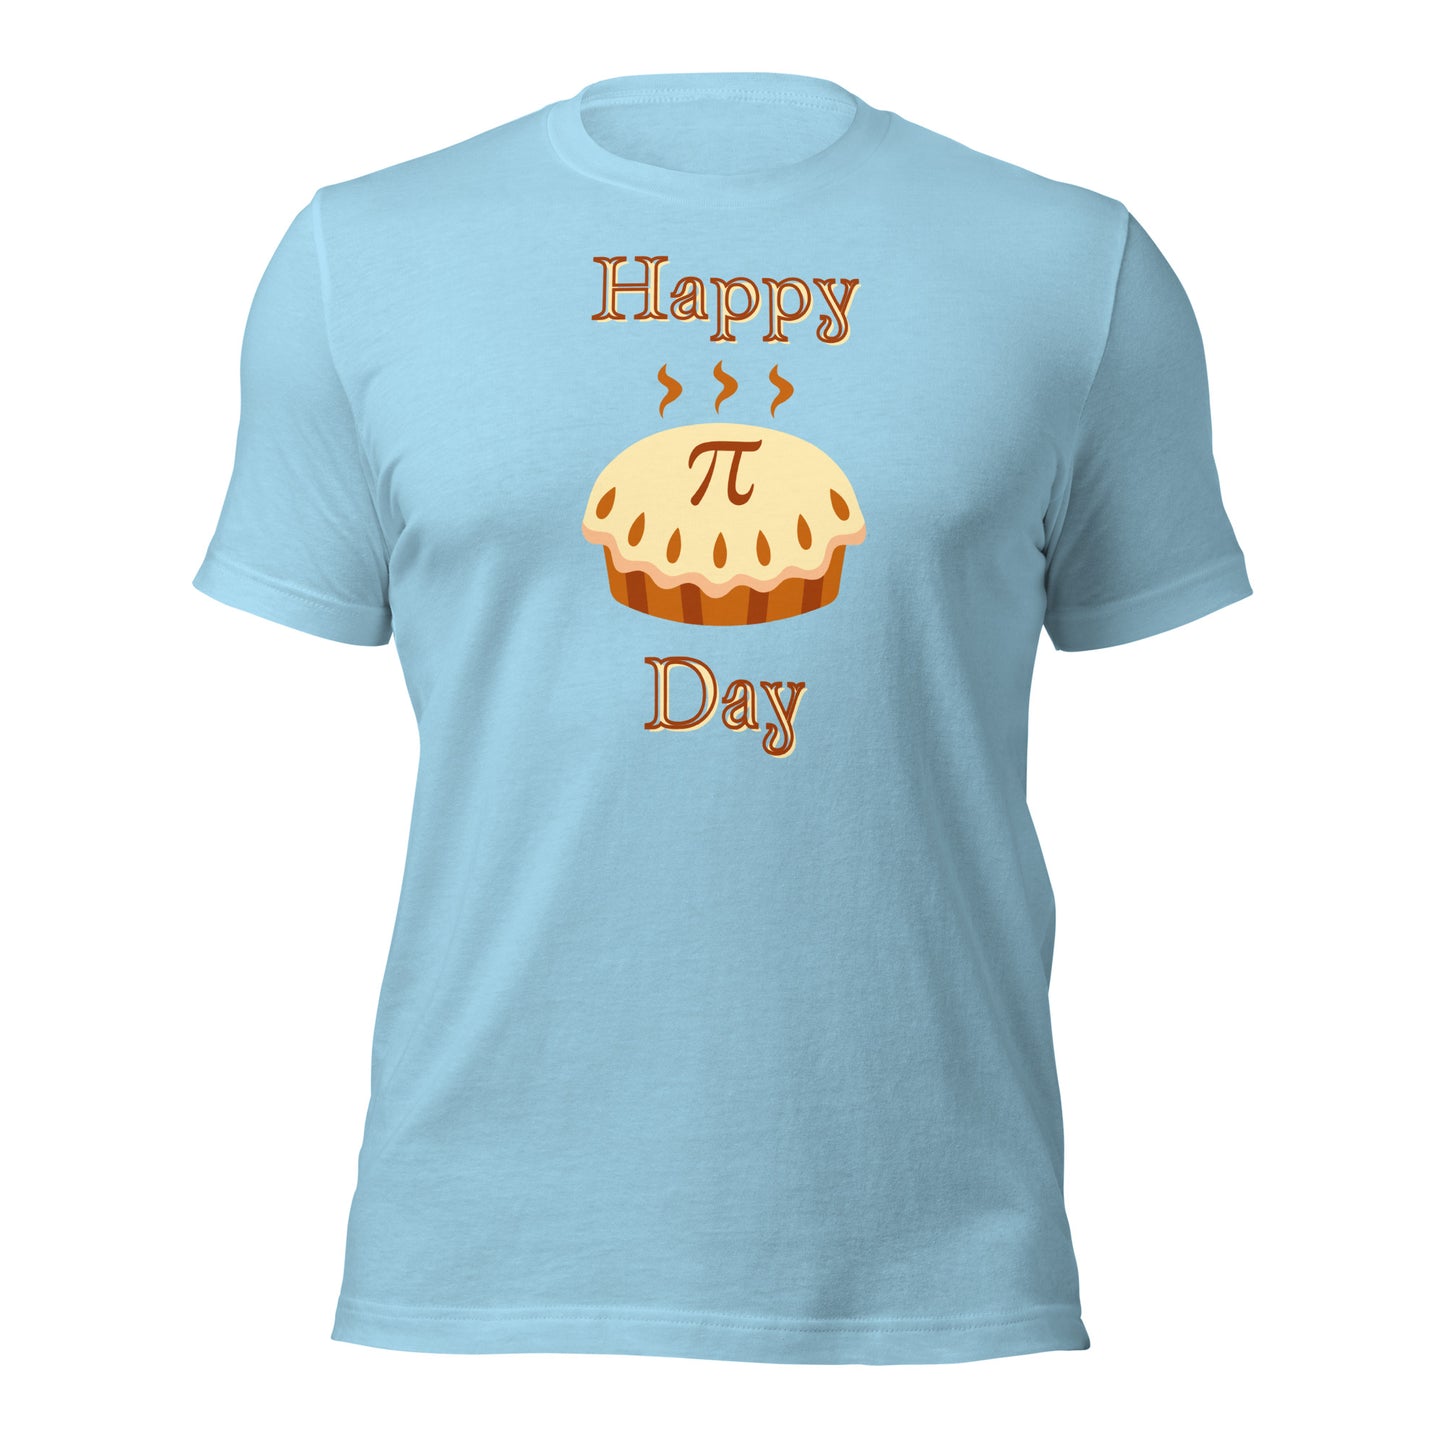 Heather color Pi Day shirt blending cotton and polyester